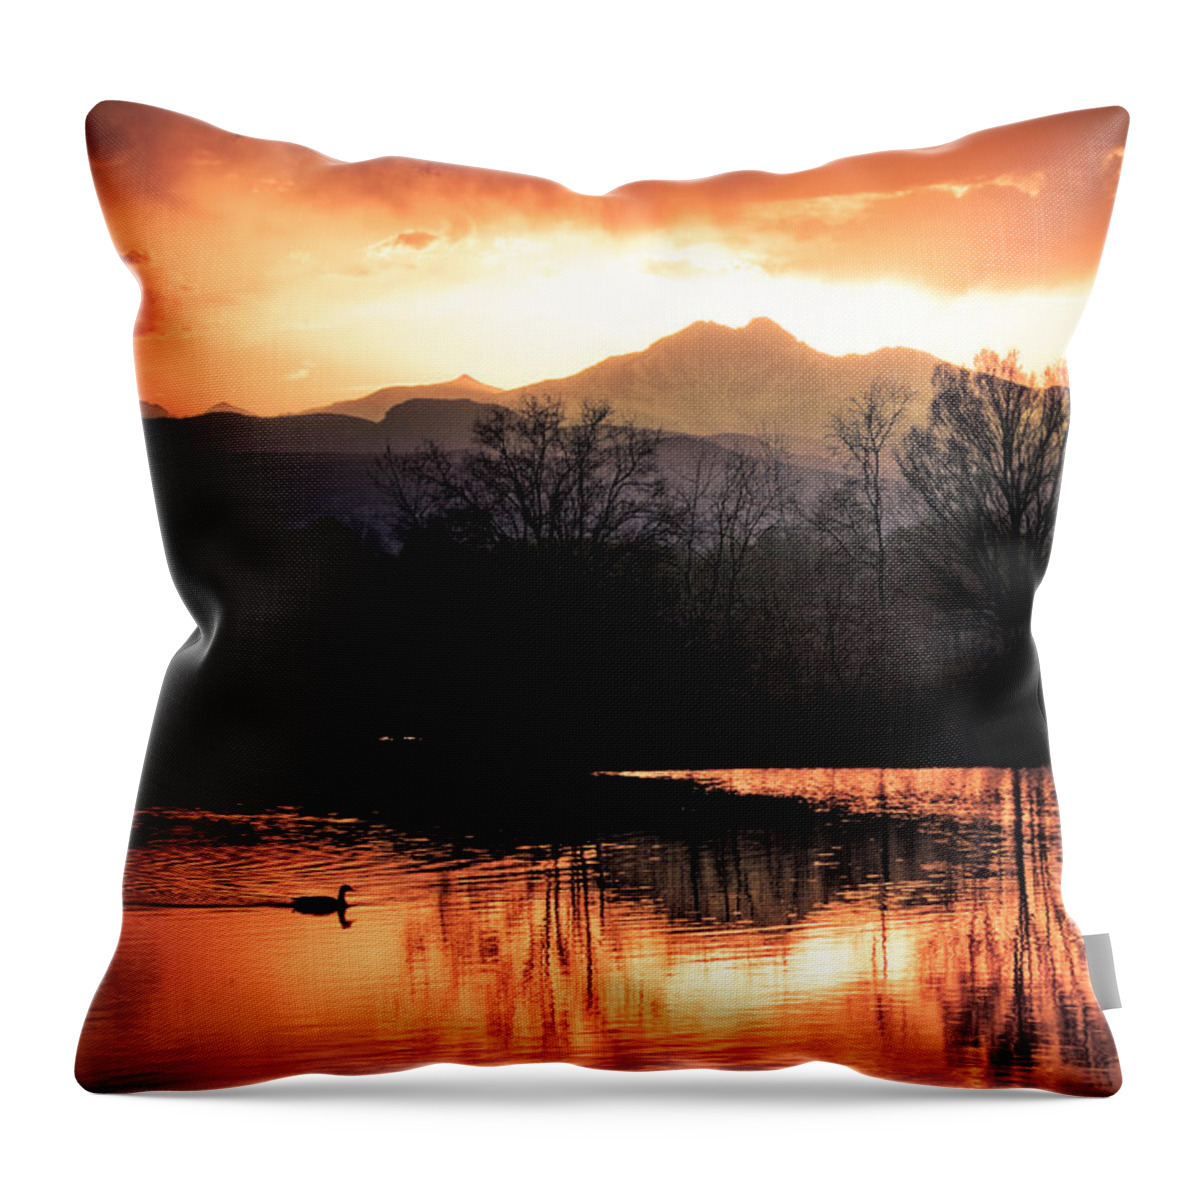 Sunsets Throw Pillow featuring the photograph Goose On Golden Ponds 1 by James BO Insogna